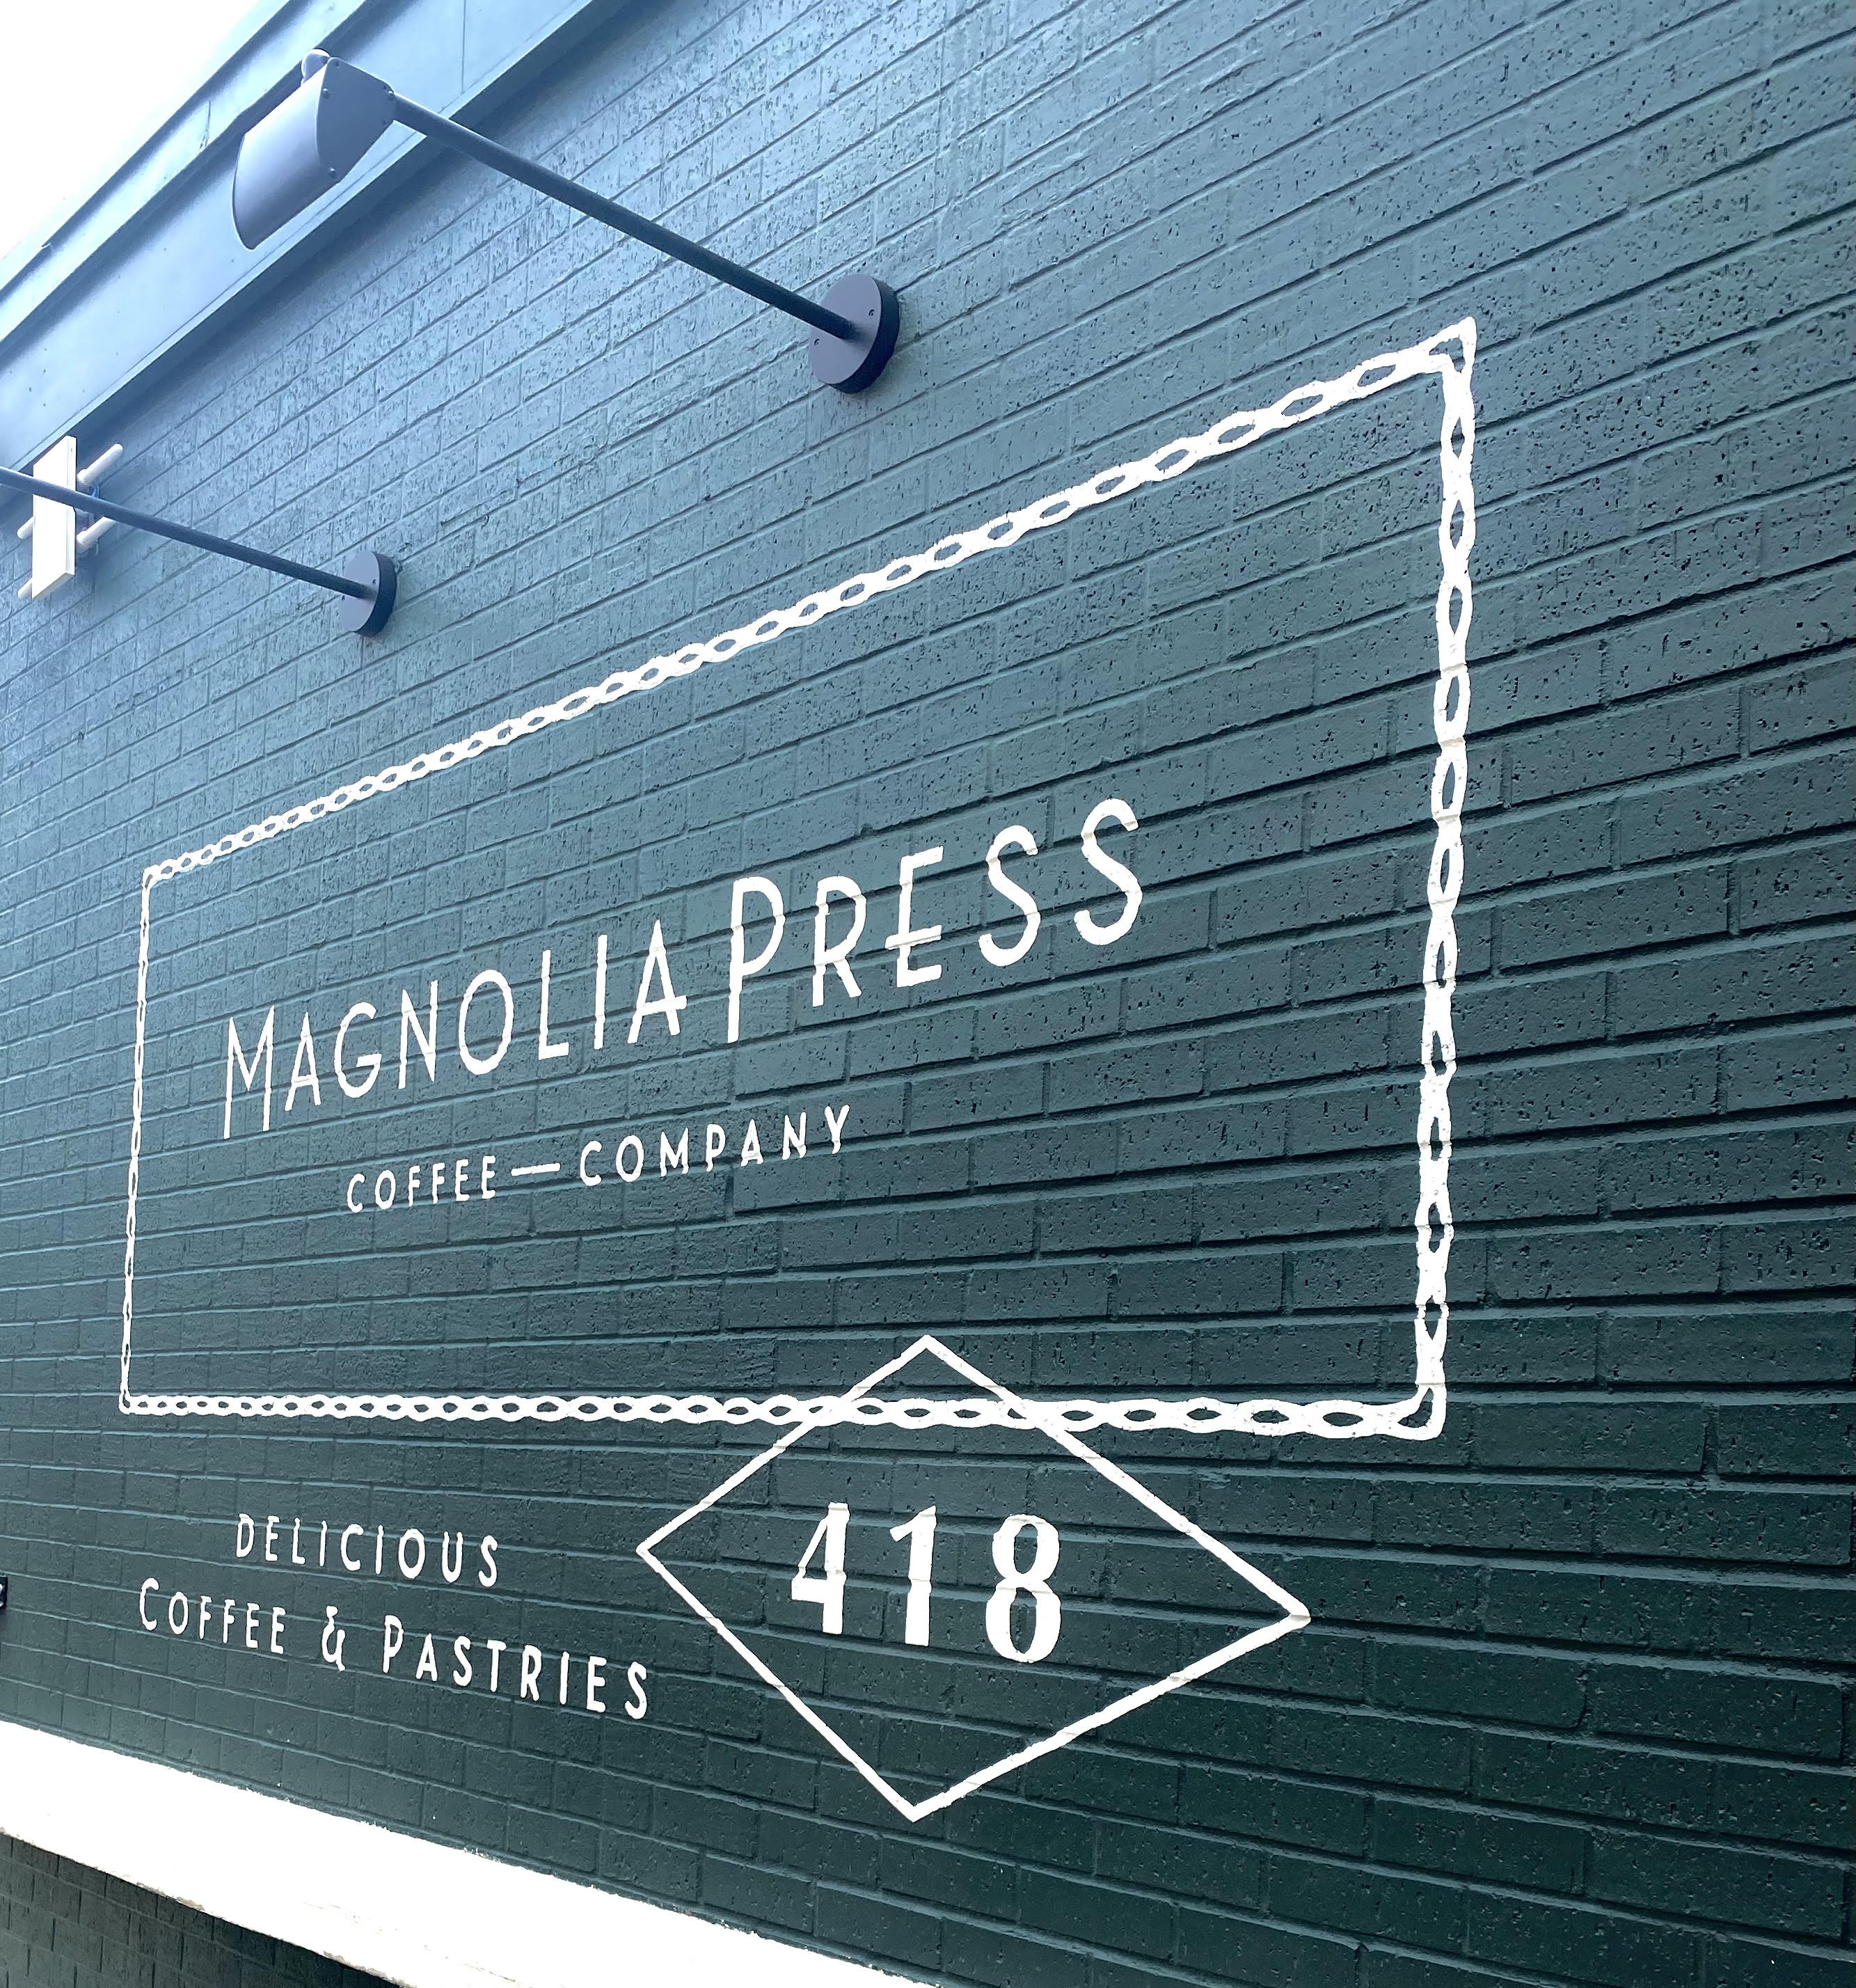 The Magnolia Press at the Magnolia Market in Waco, Texas. In the back near Magnolia Home. Has pastries and coffees found at the Silos Baking Co.